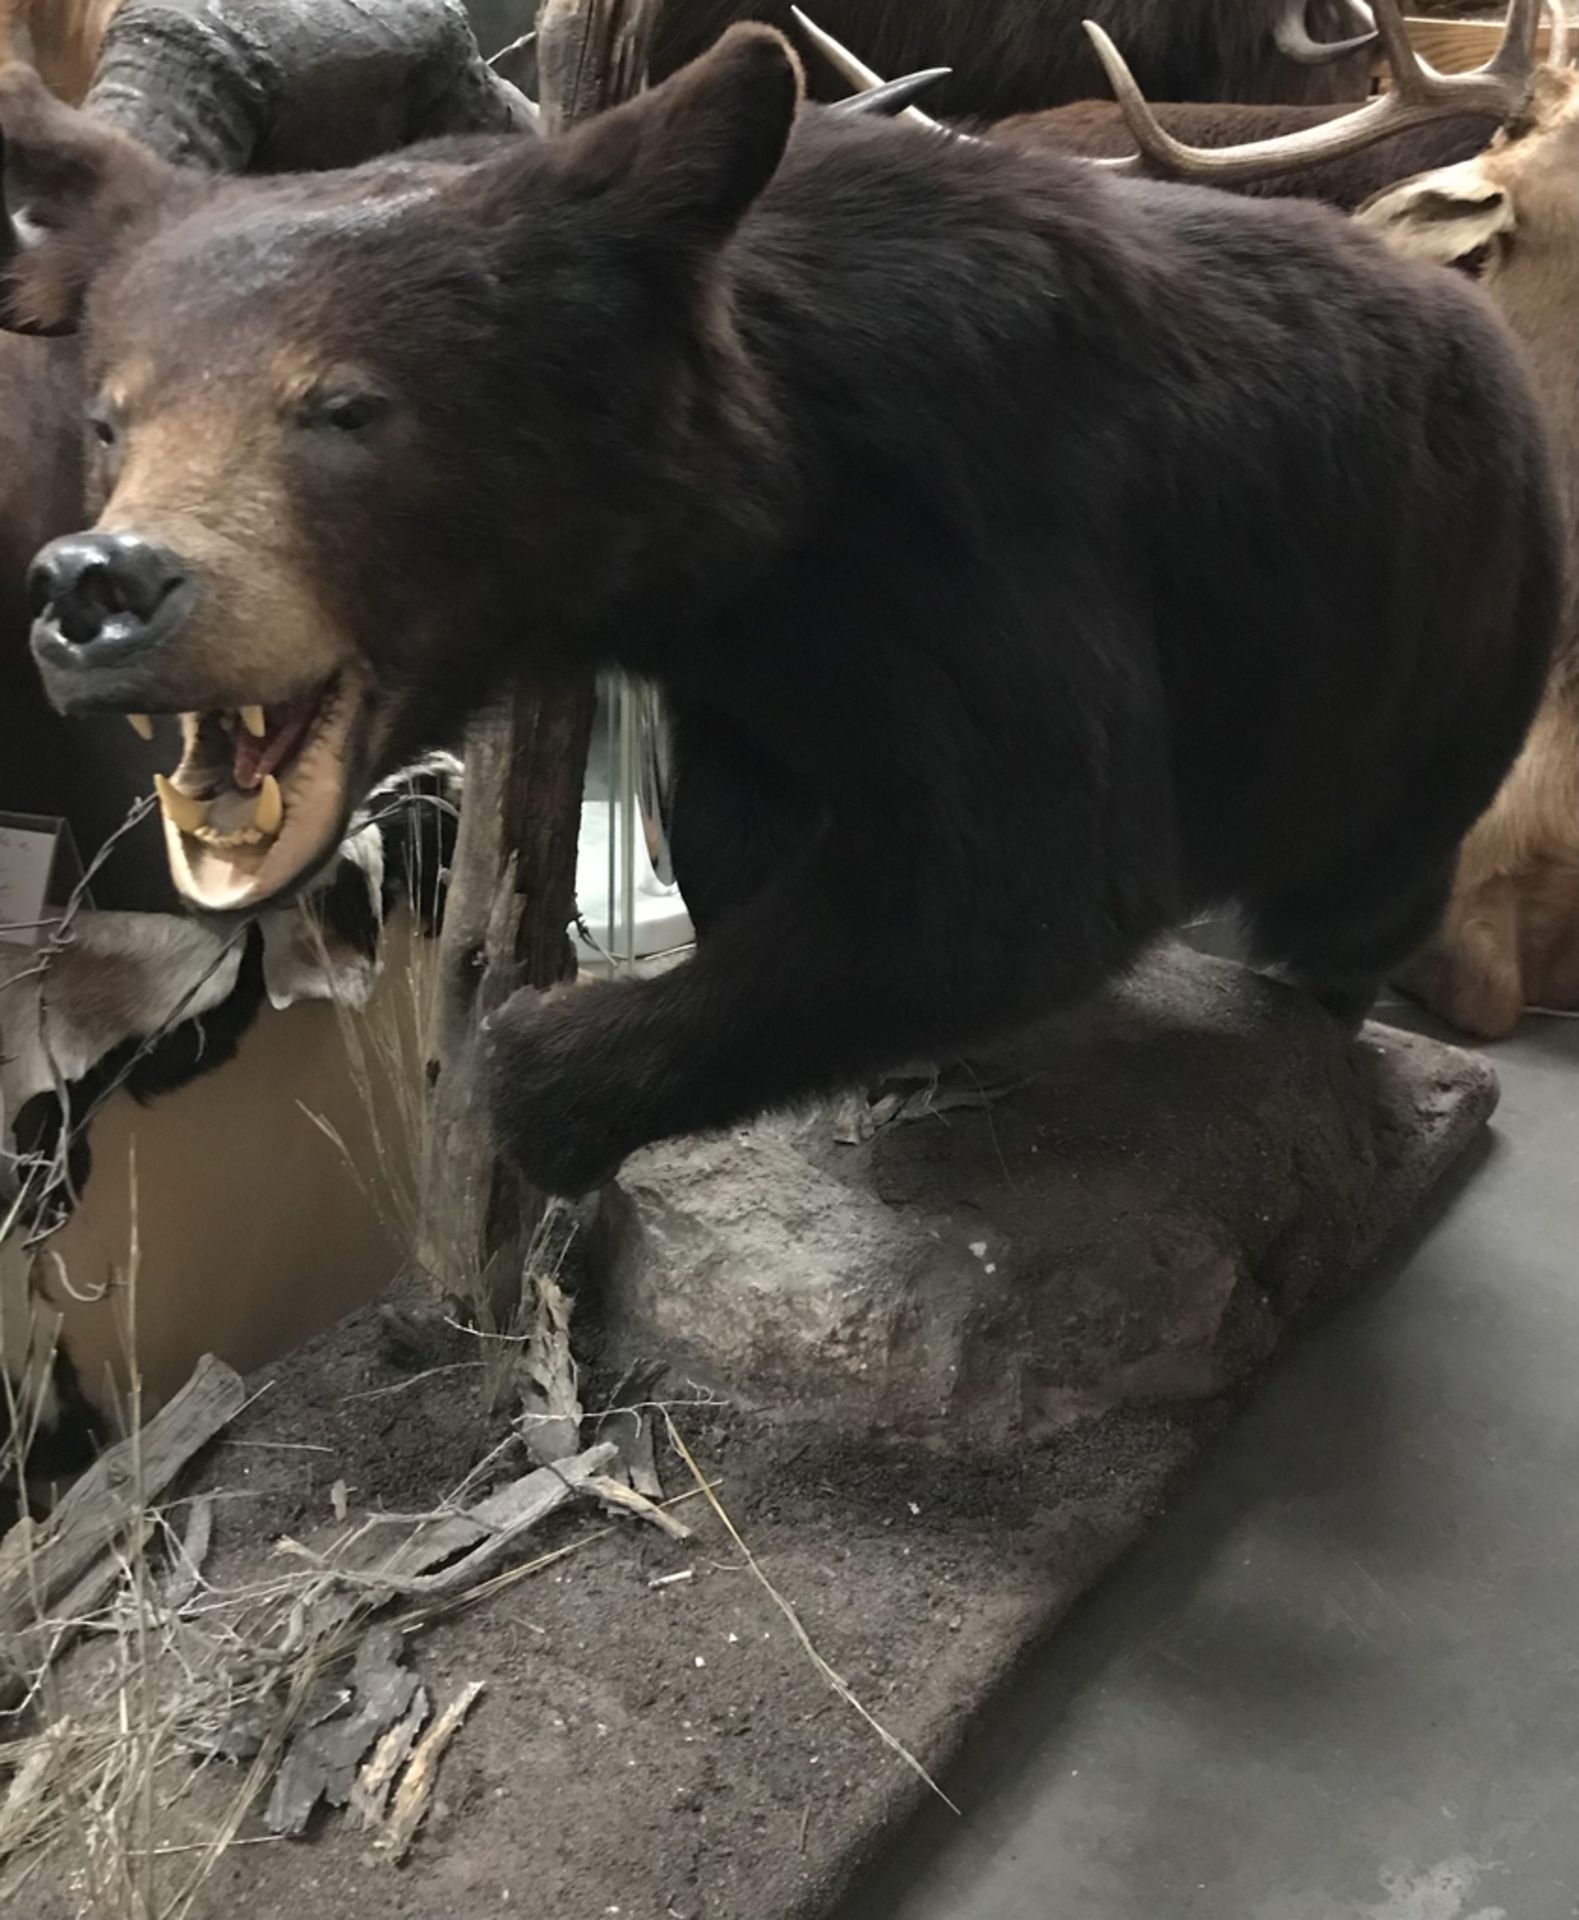 BIG BROWN BEAR WALKING NEXT TO BARBED WIRE Taxidermy - Image 2 of 2